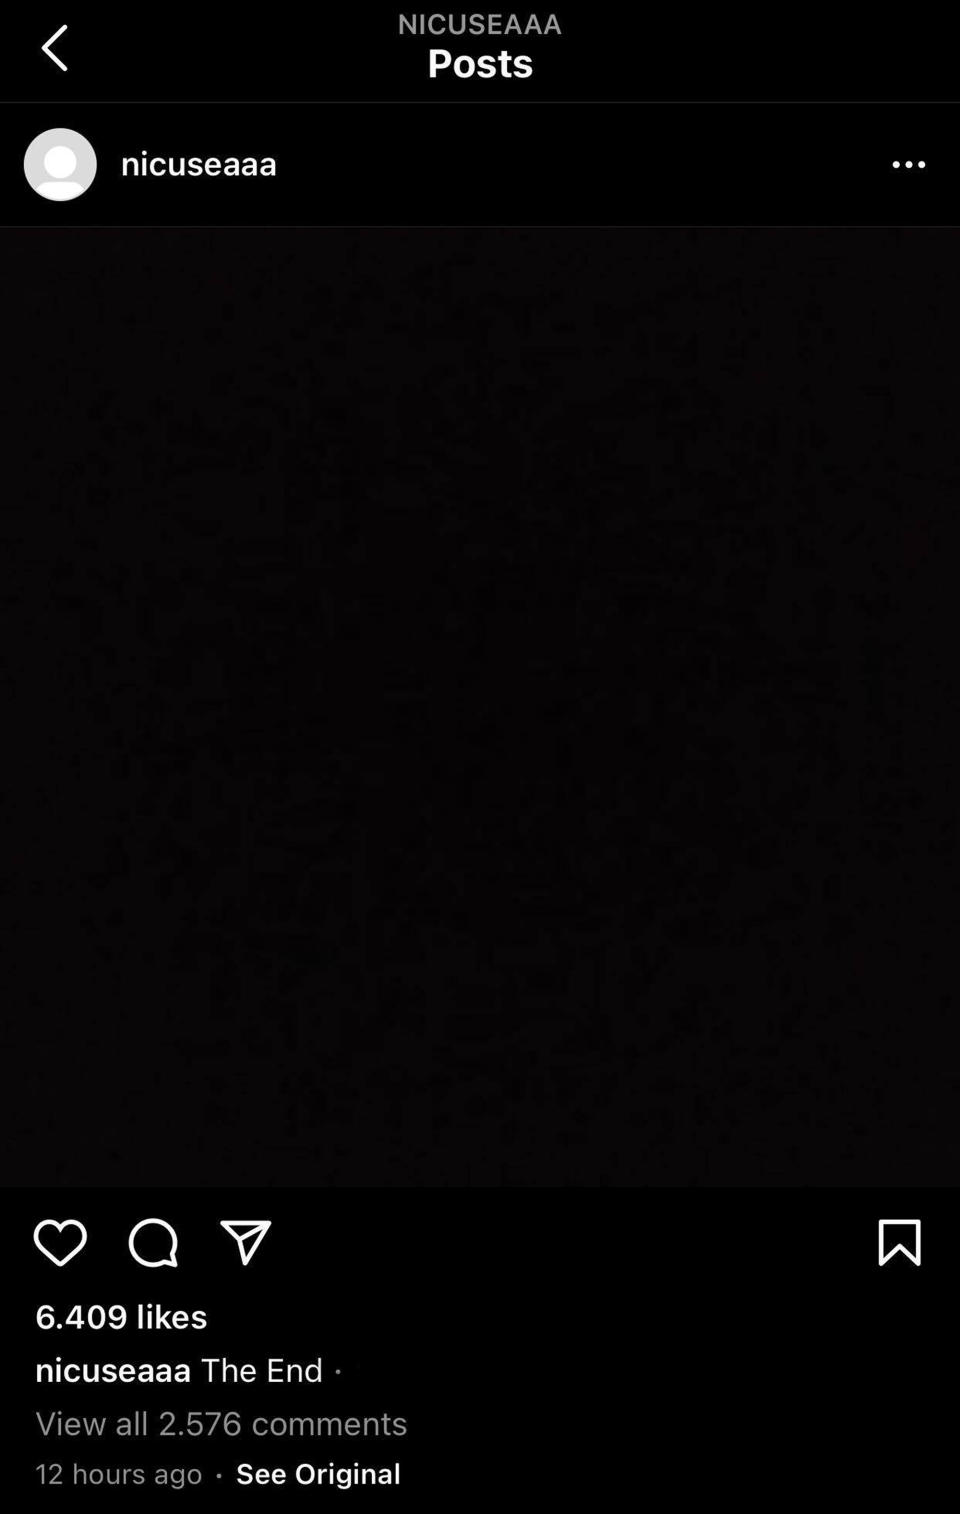 The post from Nicuseaaa's Instagram page showing a black image and the caption: 